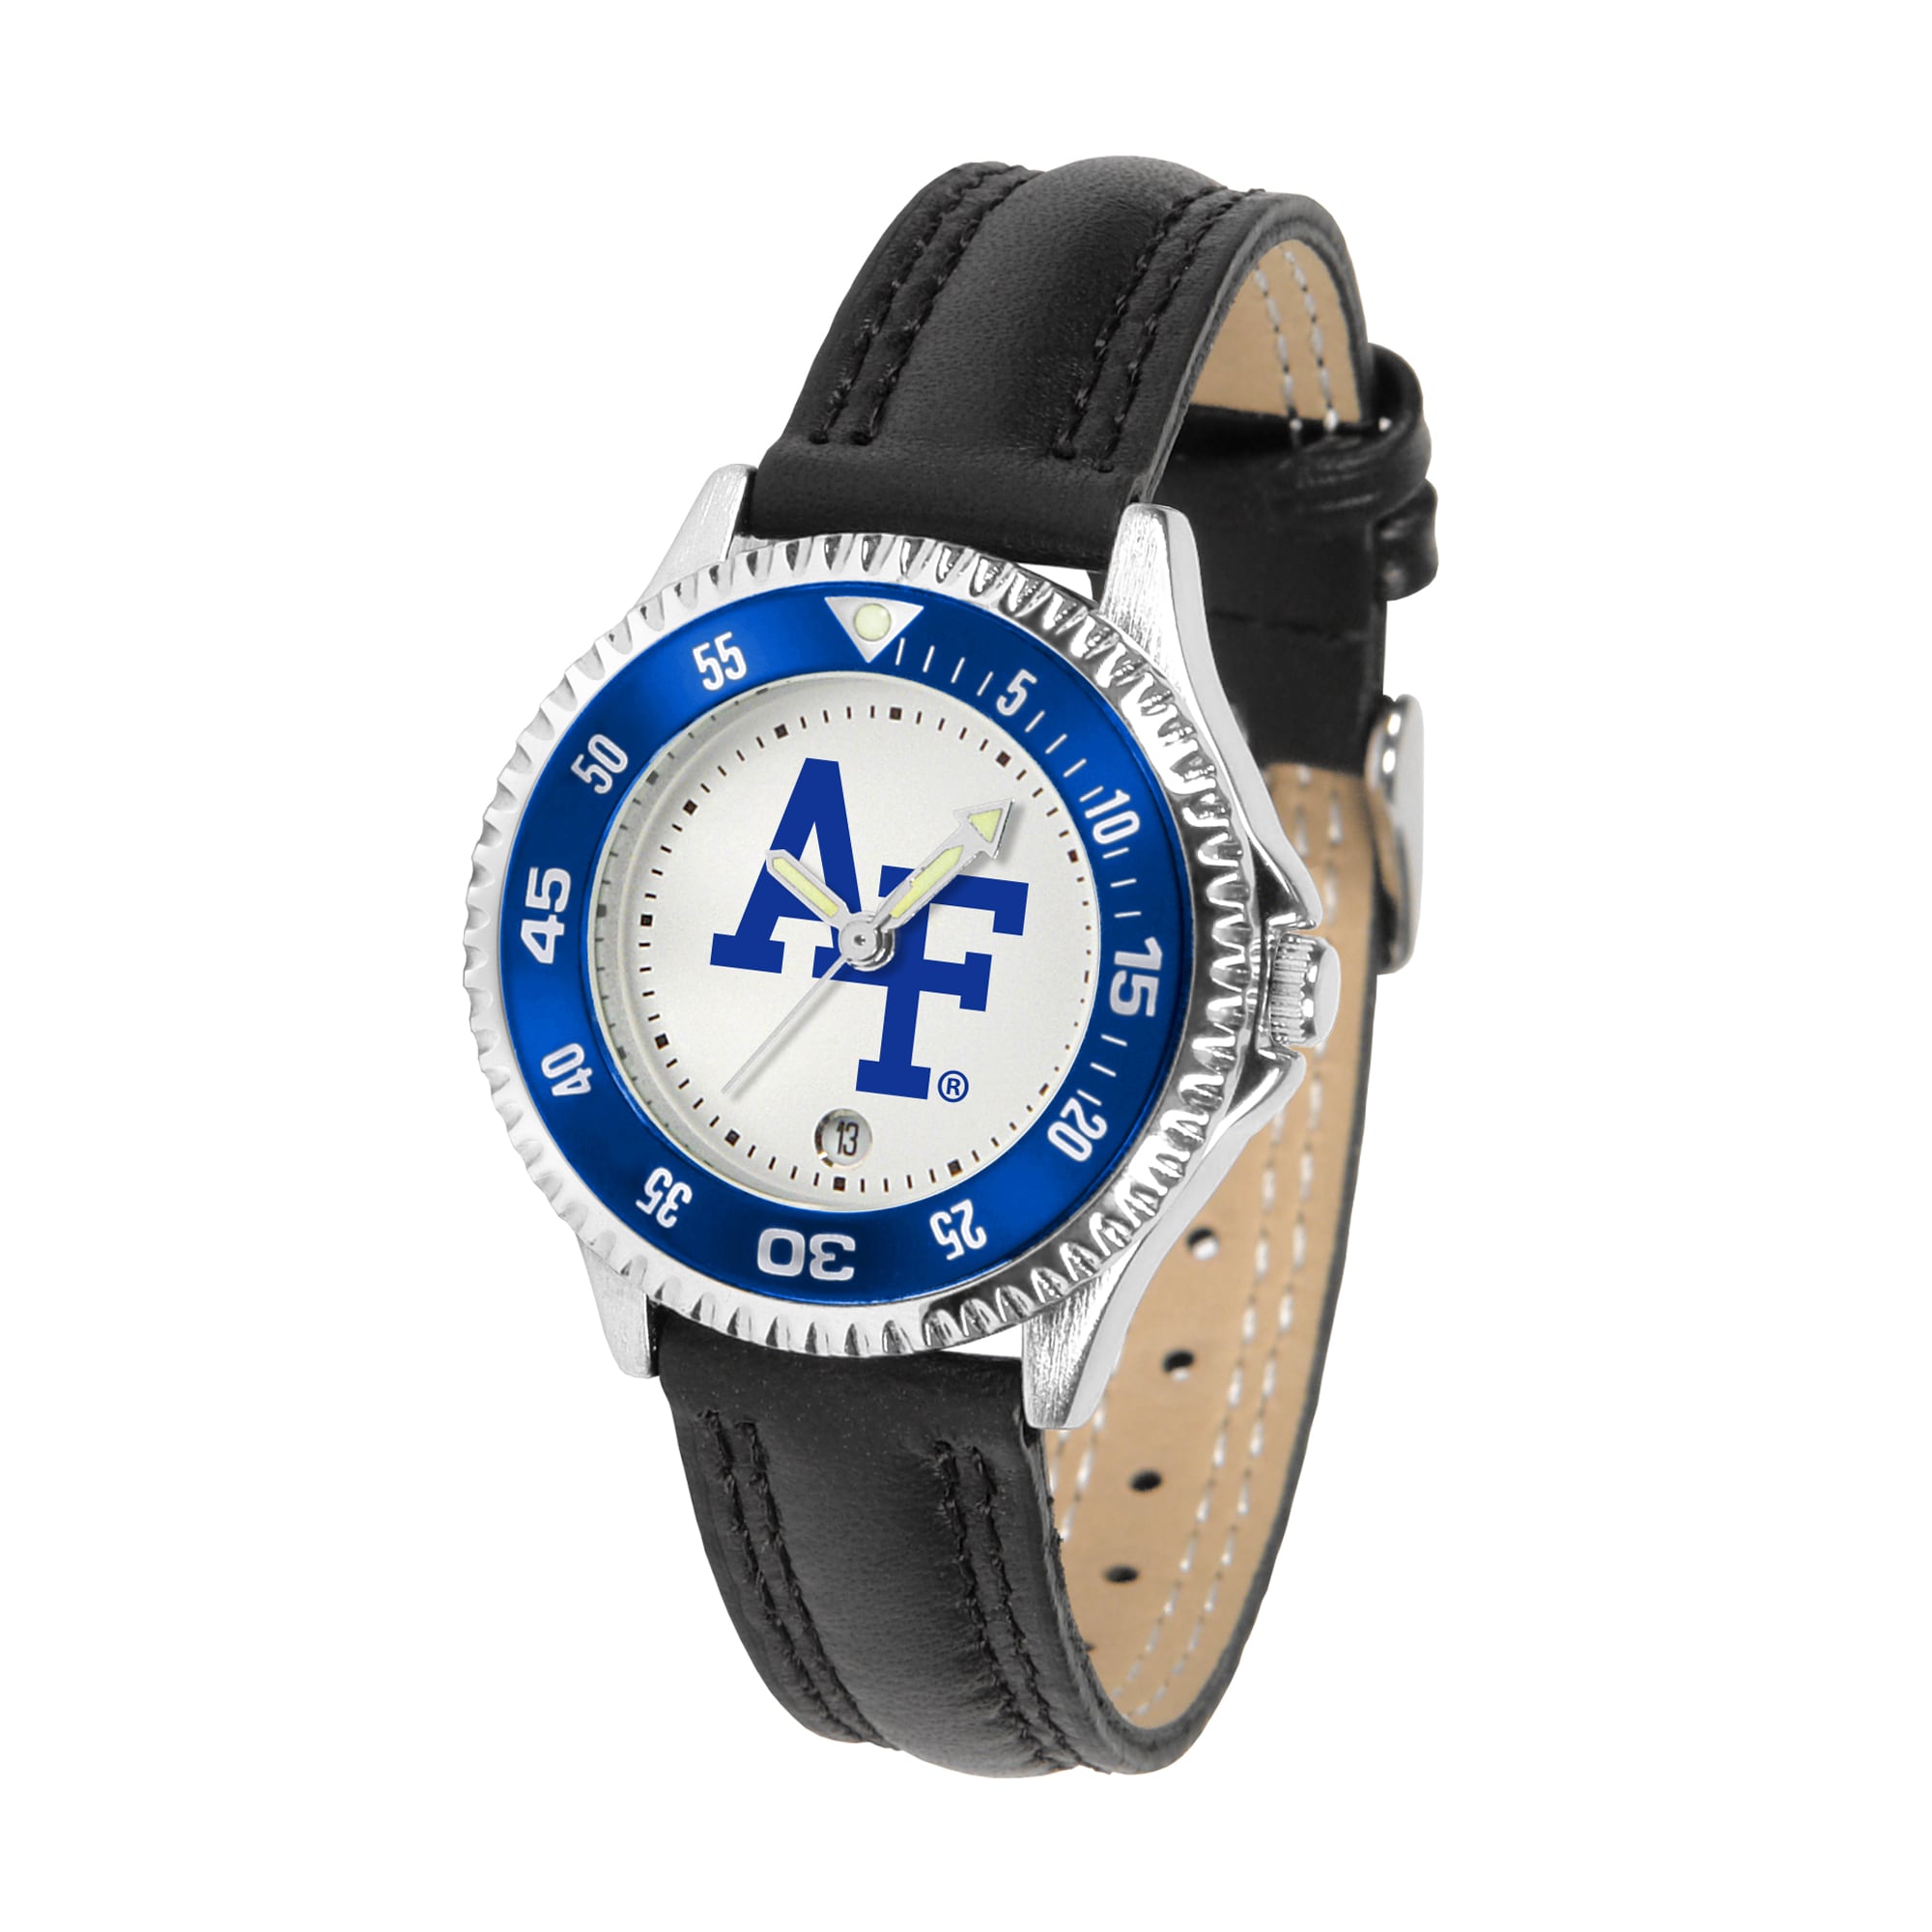 Women's White Air Force Falcons Competitor Watch - image 1 of 4